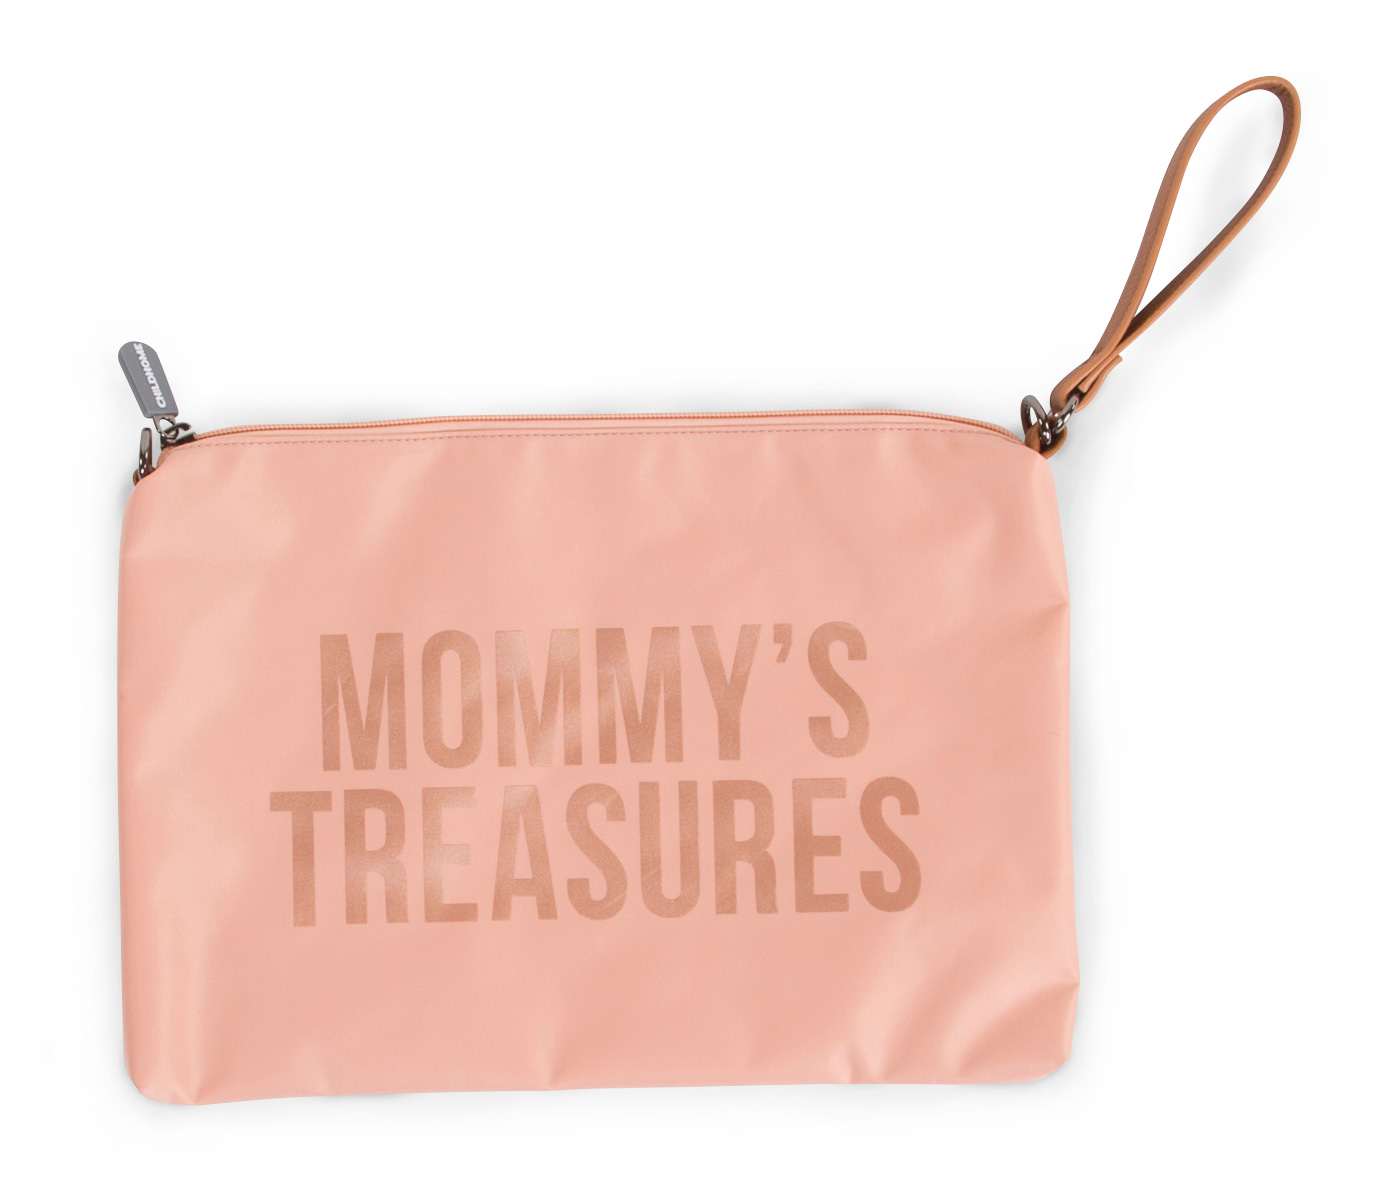 Mommy's Treasures Clutch - Rose Cuivre